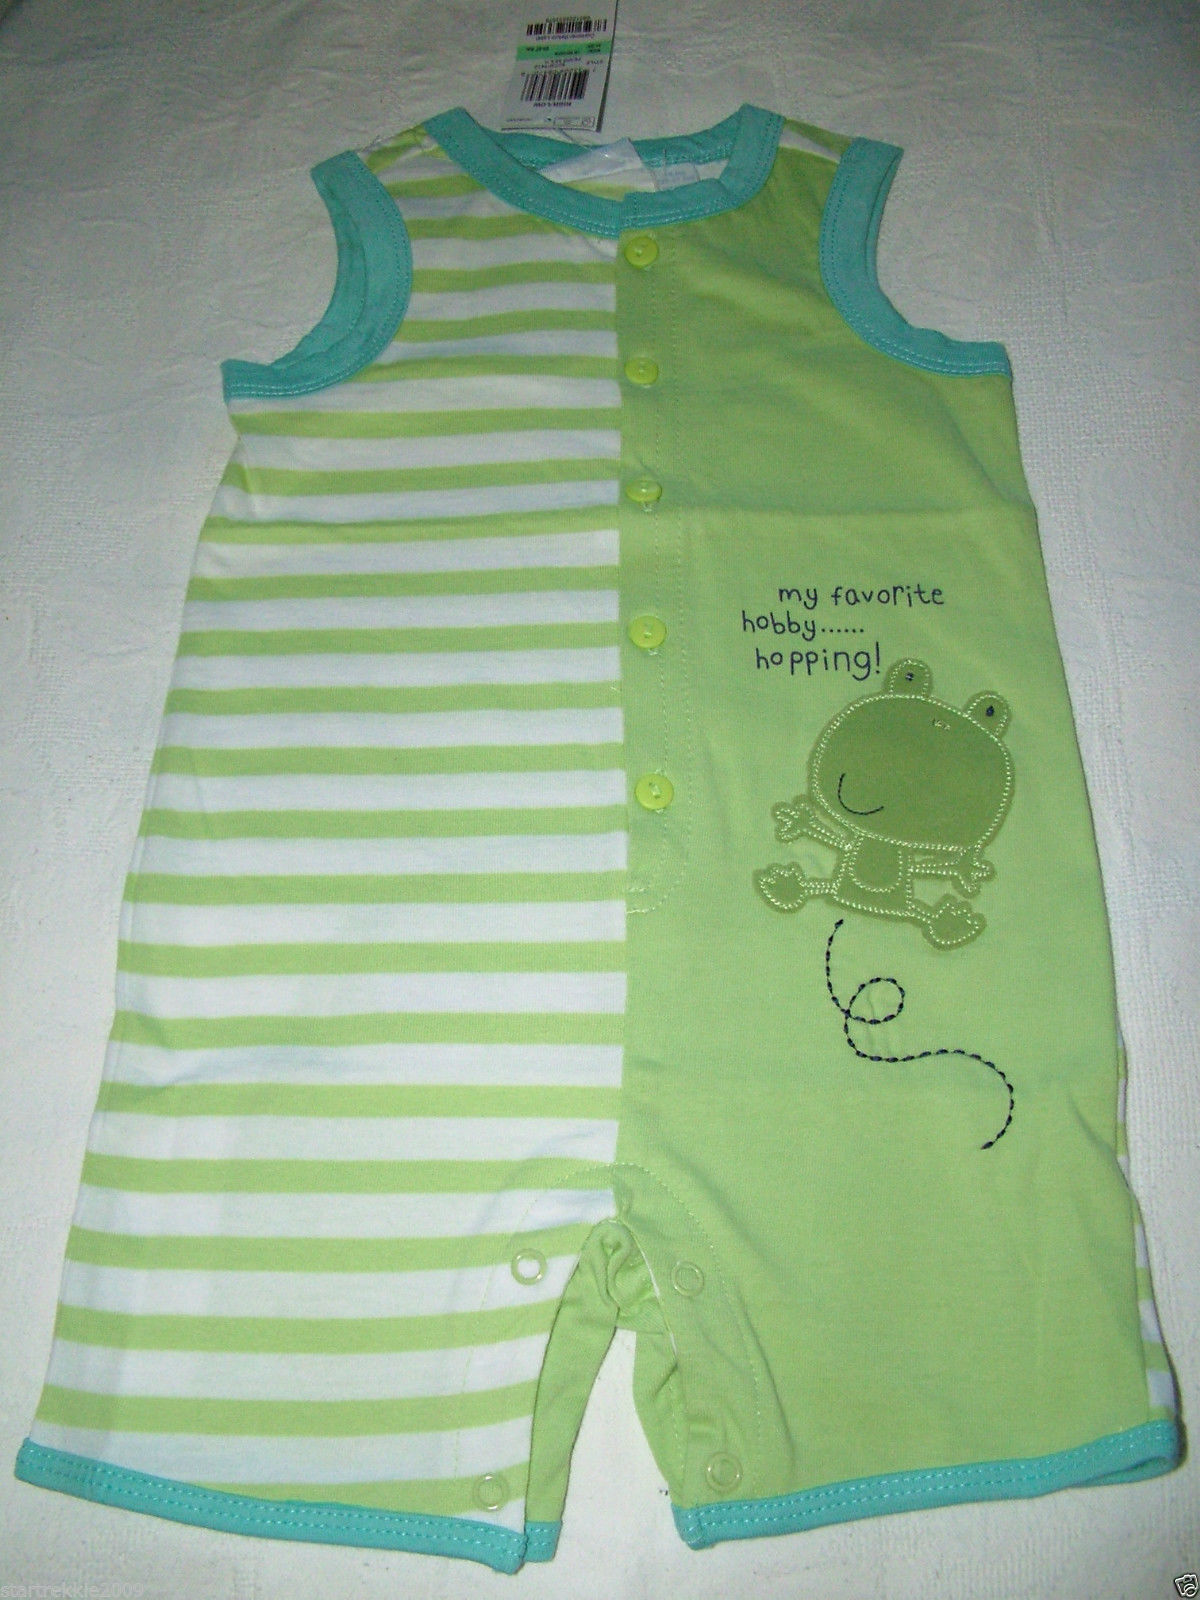 First Impressions Baby Boy Stripe/Solid Romper, Green Frog. Sz.12 Months, NWT - £7.96 GBP